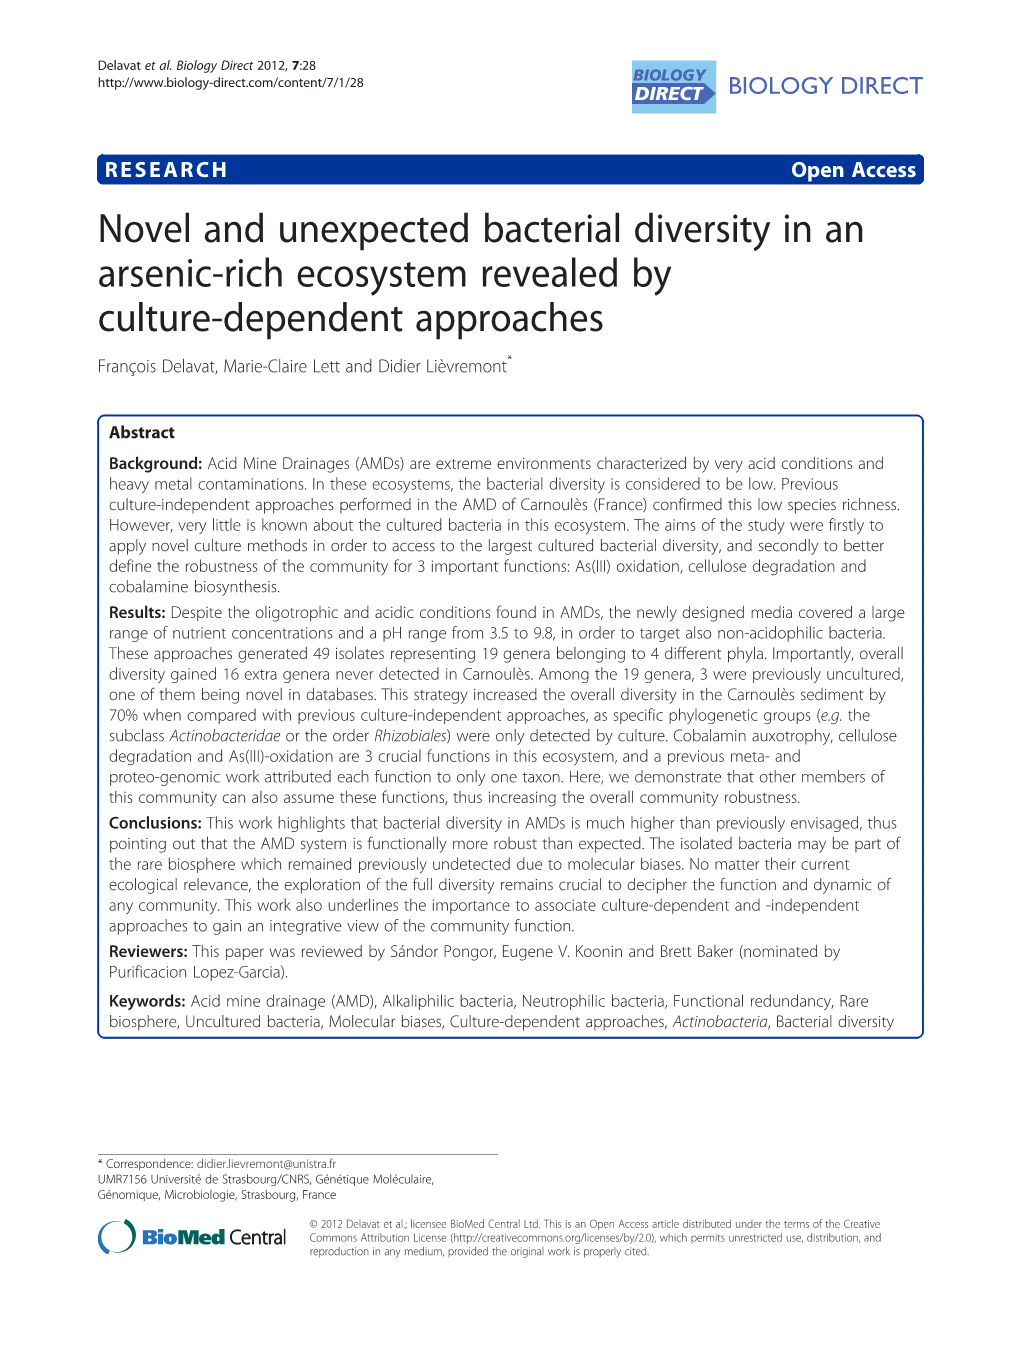 Novel and Unexpected Bacterial Diversity in An